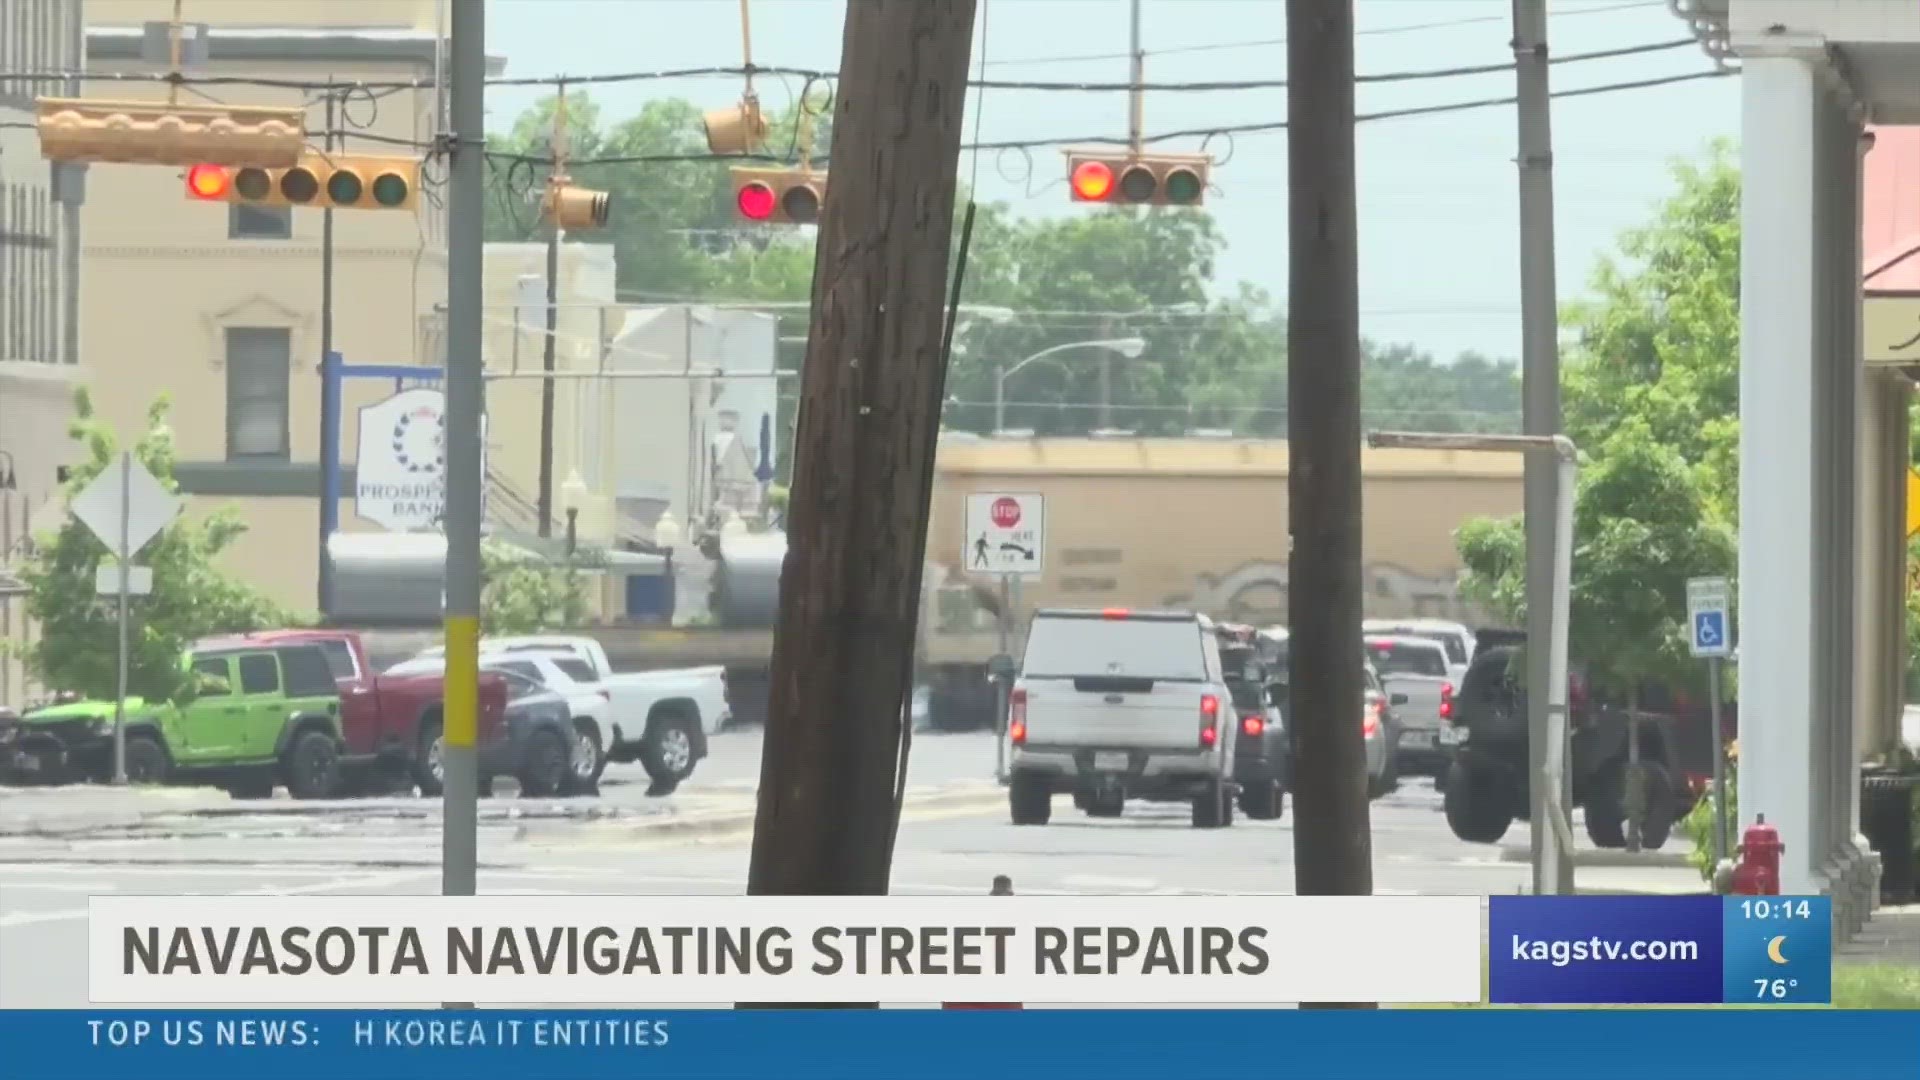 The projects are set to repair more than nine miles of roads across the city.